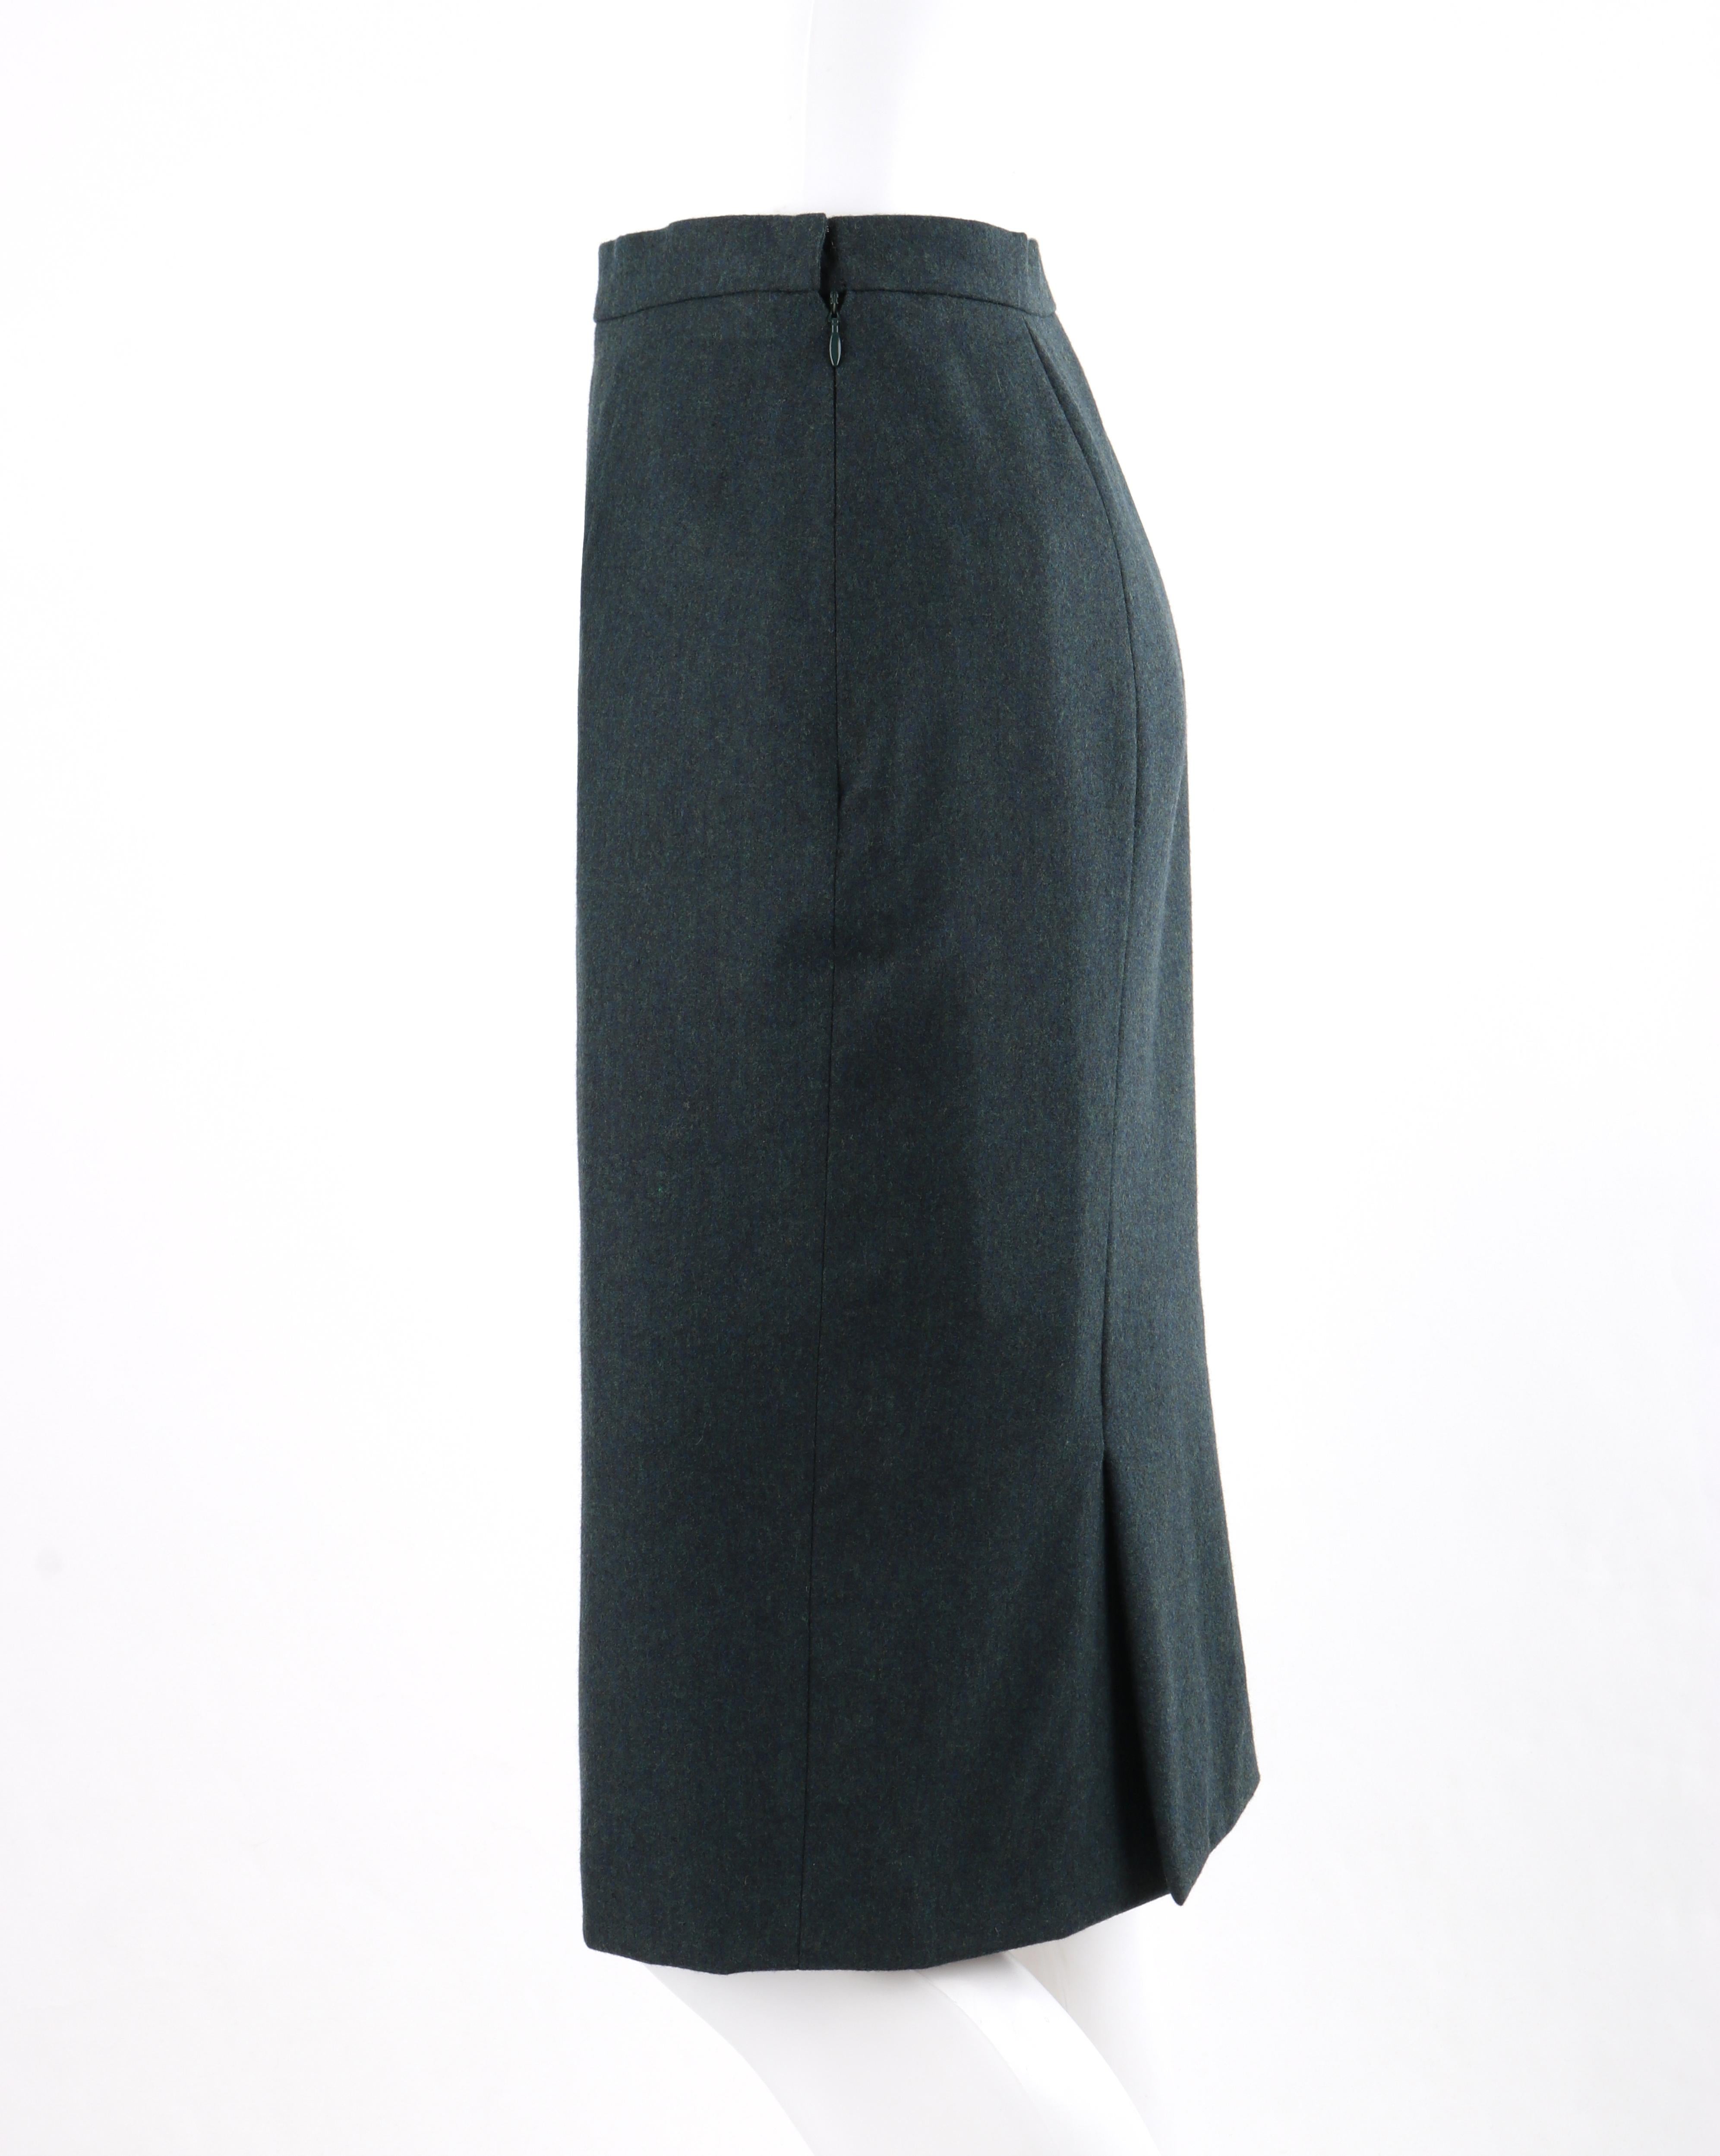 GIVENCHY Couture A/W 1998 ALEXANDER McQUEEN Dark Green Tailored Blazer Skirt Set For Sale 1